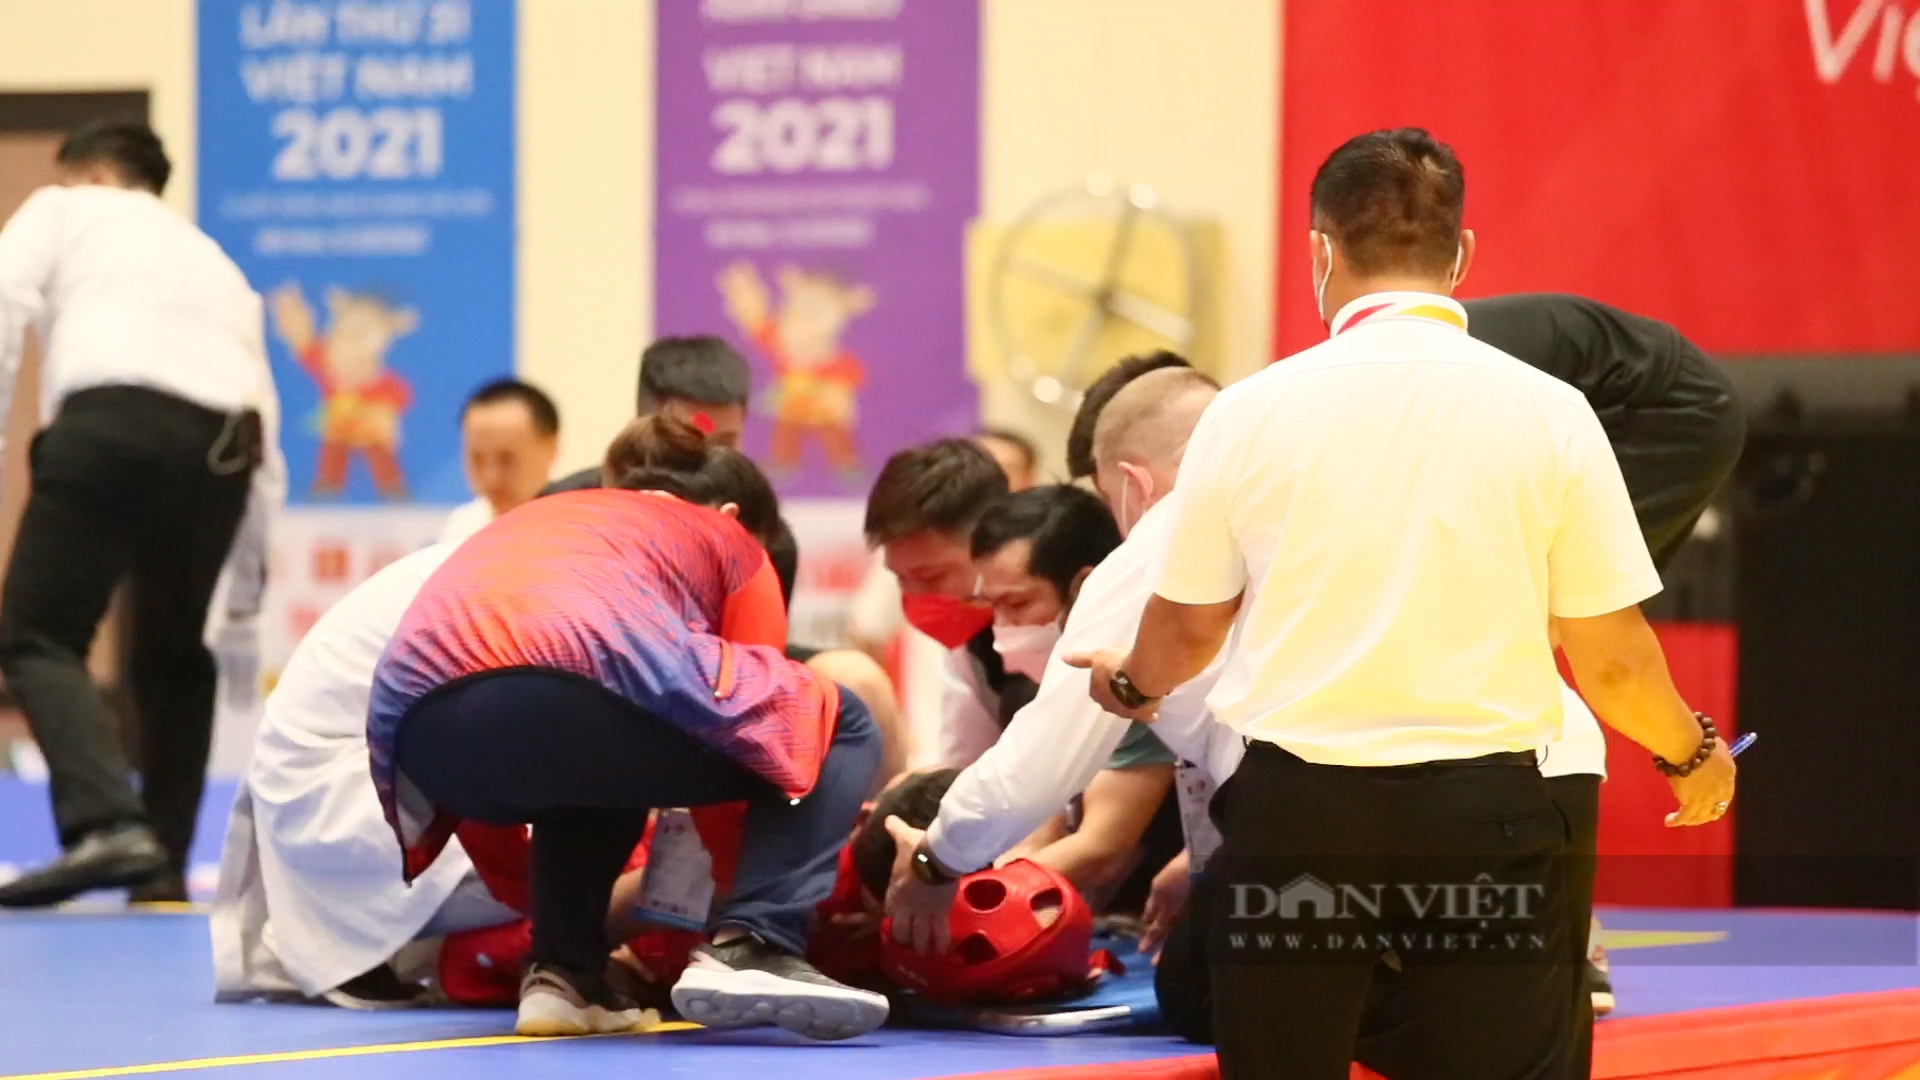 The Cambodian martial artist Wushu lost consciousness after a 